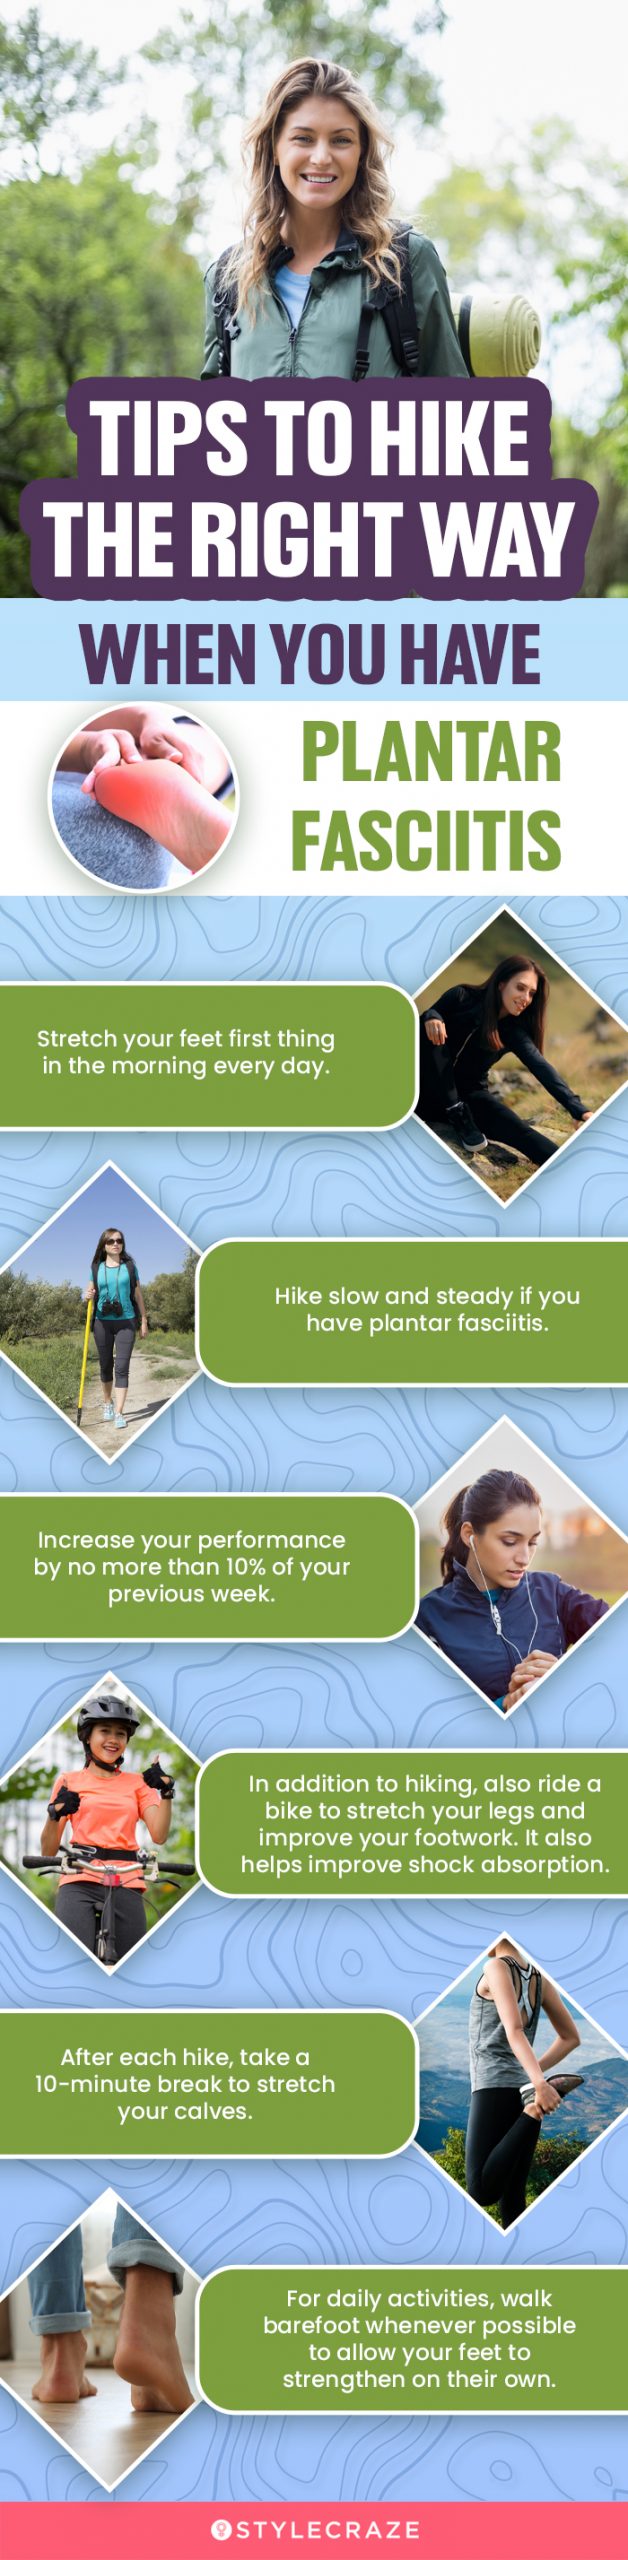 Tips To Hike The Right Way When You Have Plantar Fasciitis (infographic)